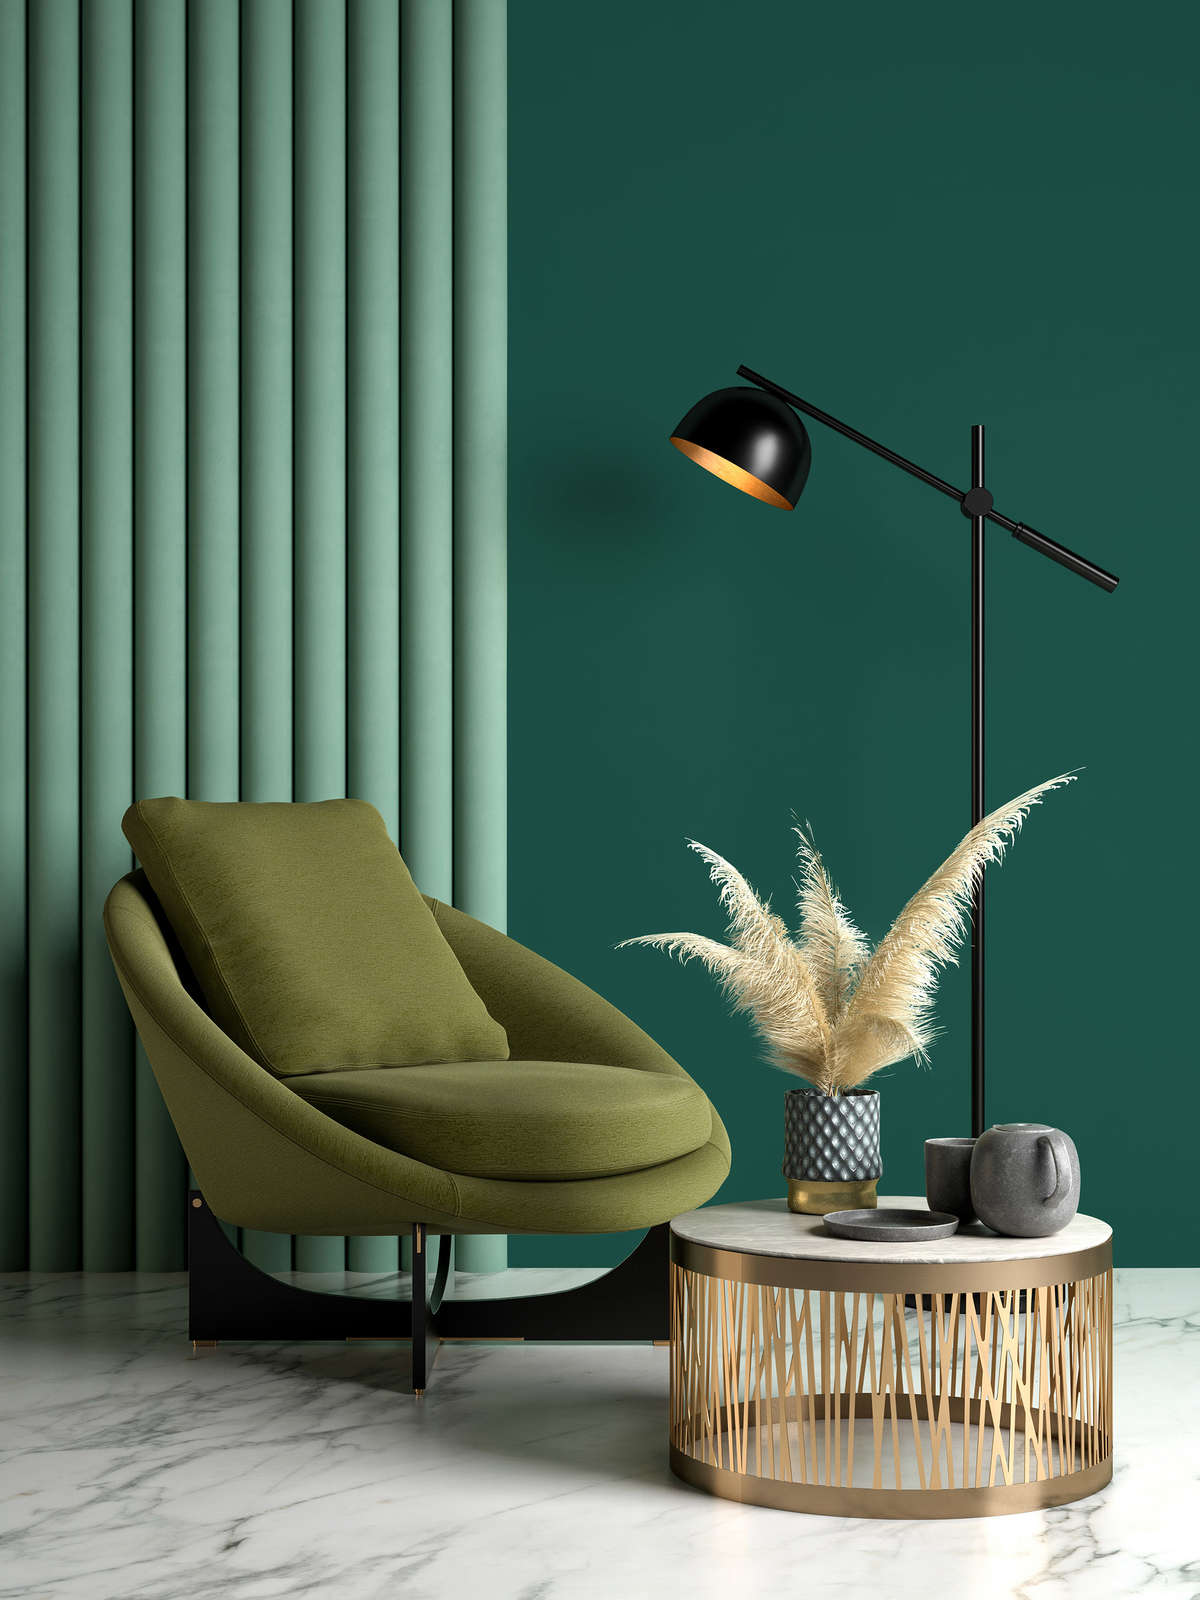             Premium Wall Paint gorgeous emerald green »Expressive Emerald« NW412 – 5 litre
        